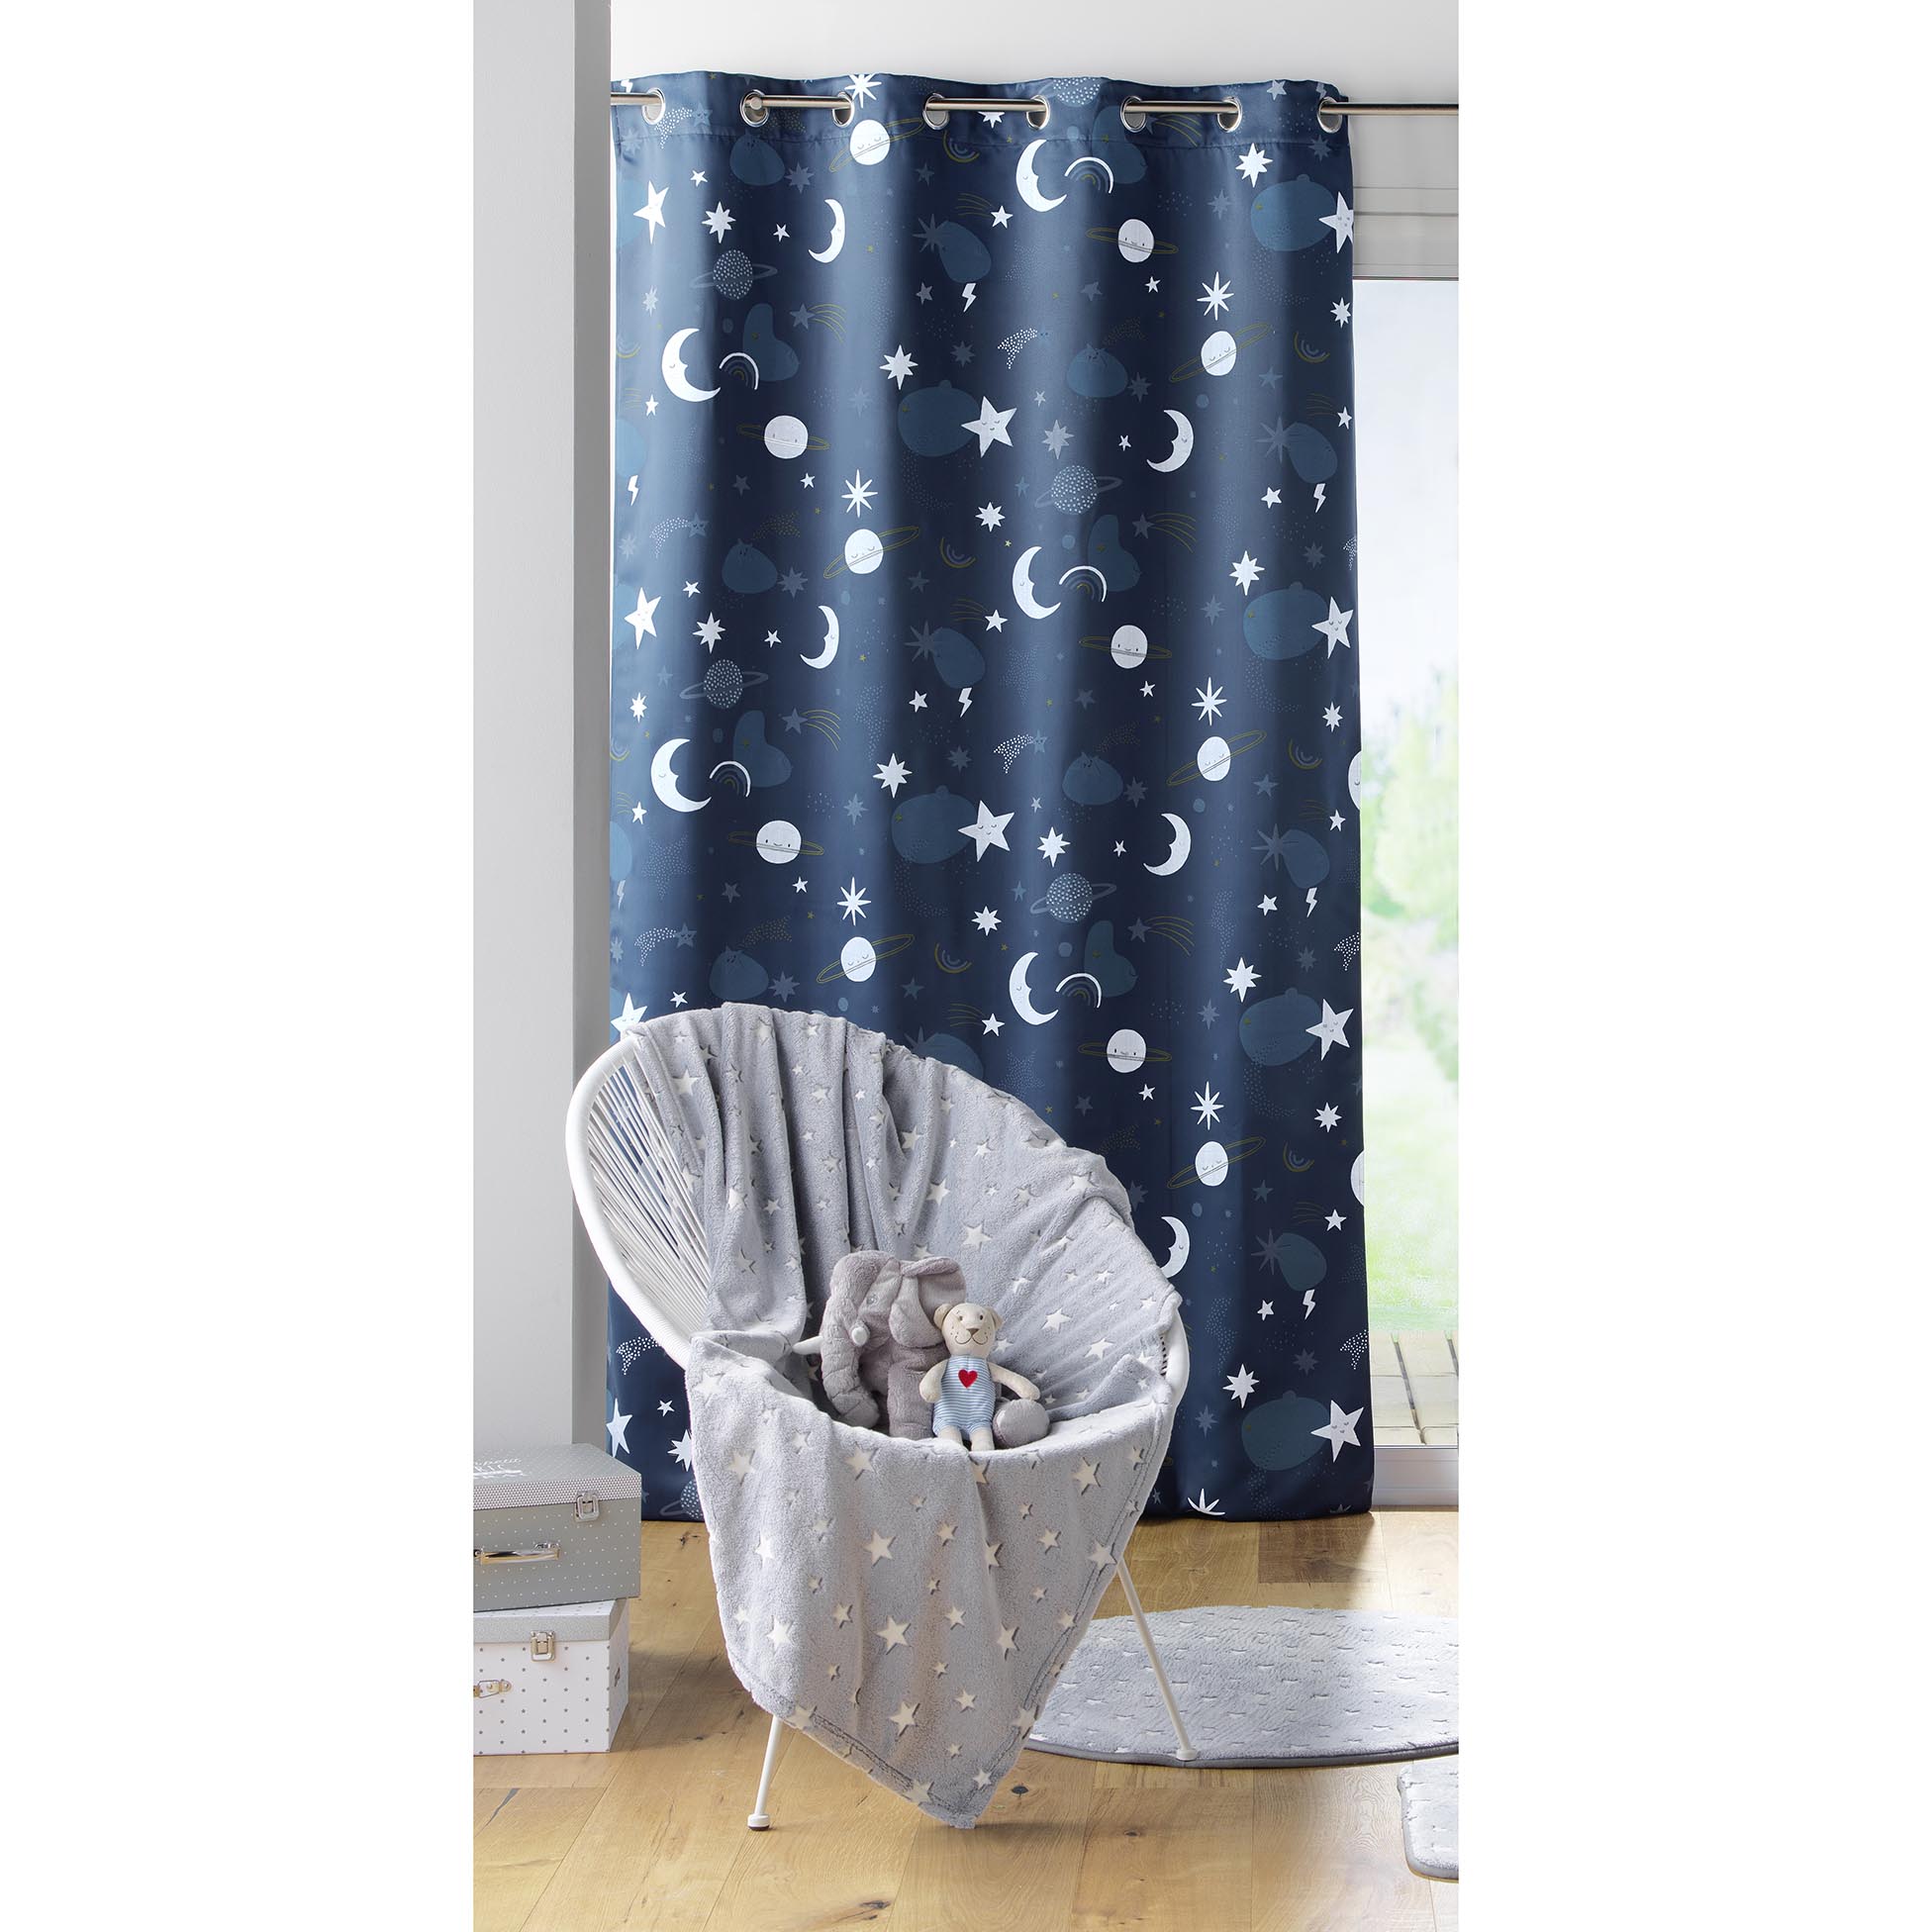 Rideau occultant enfant ambiance astrale polyester bleu 260 x 140